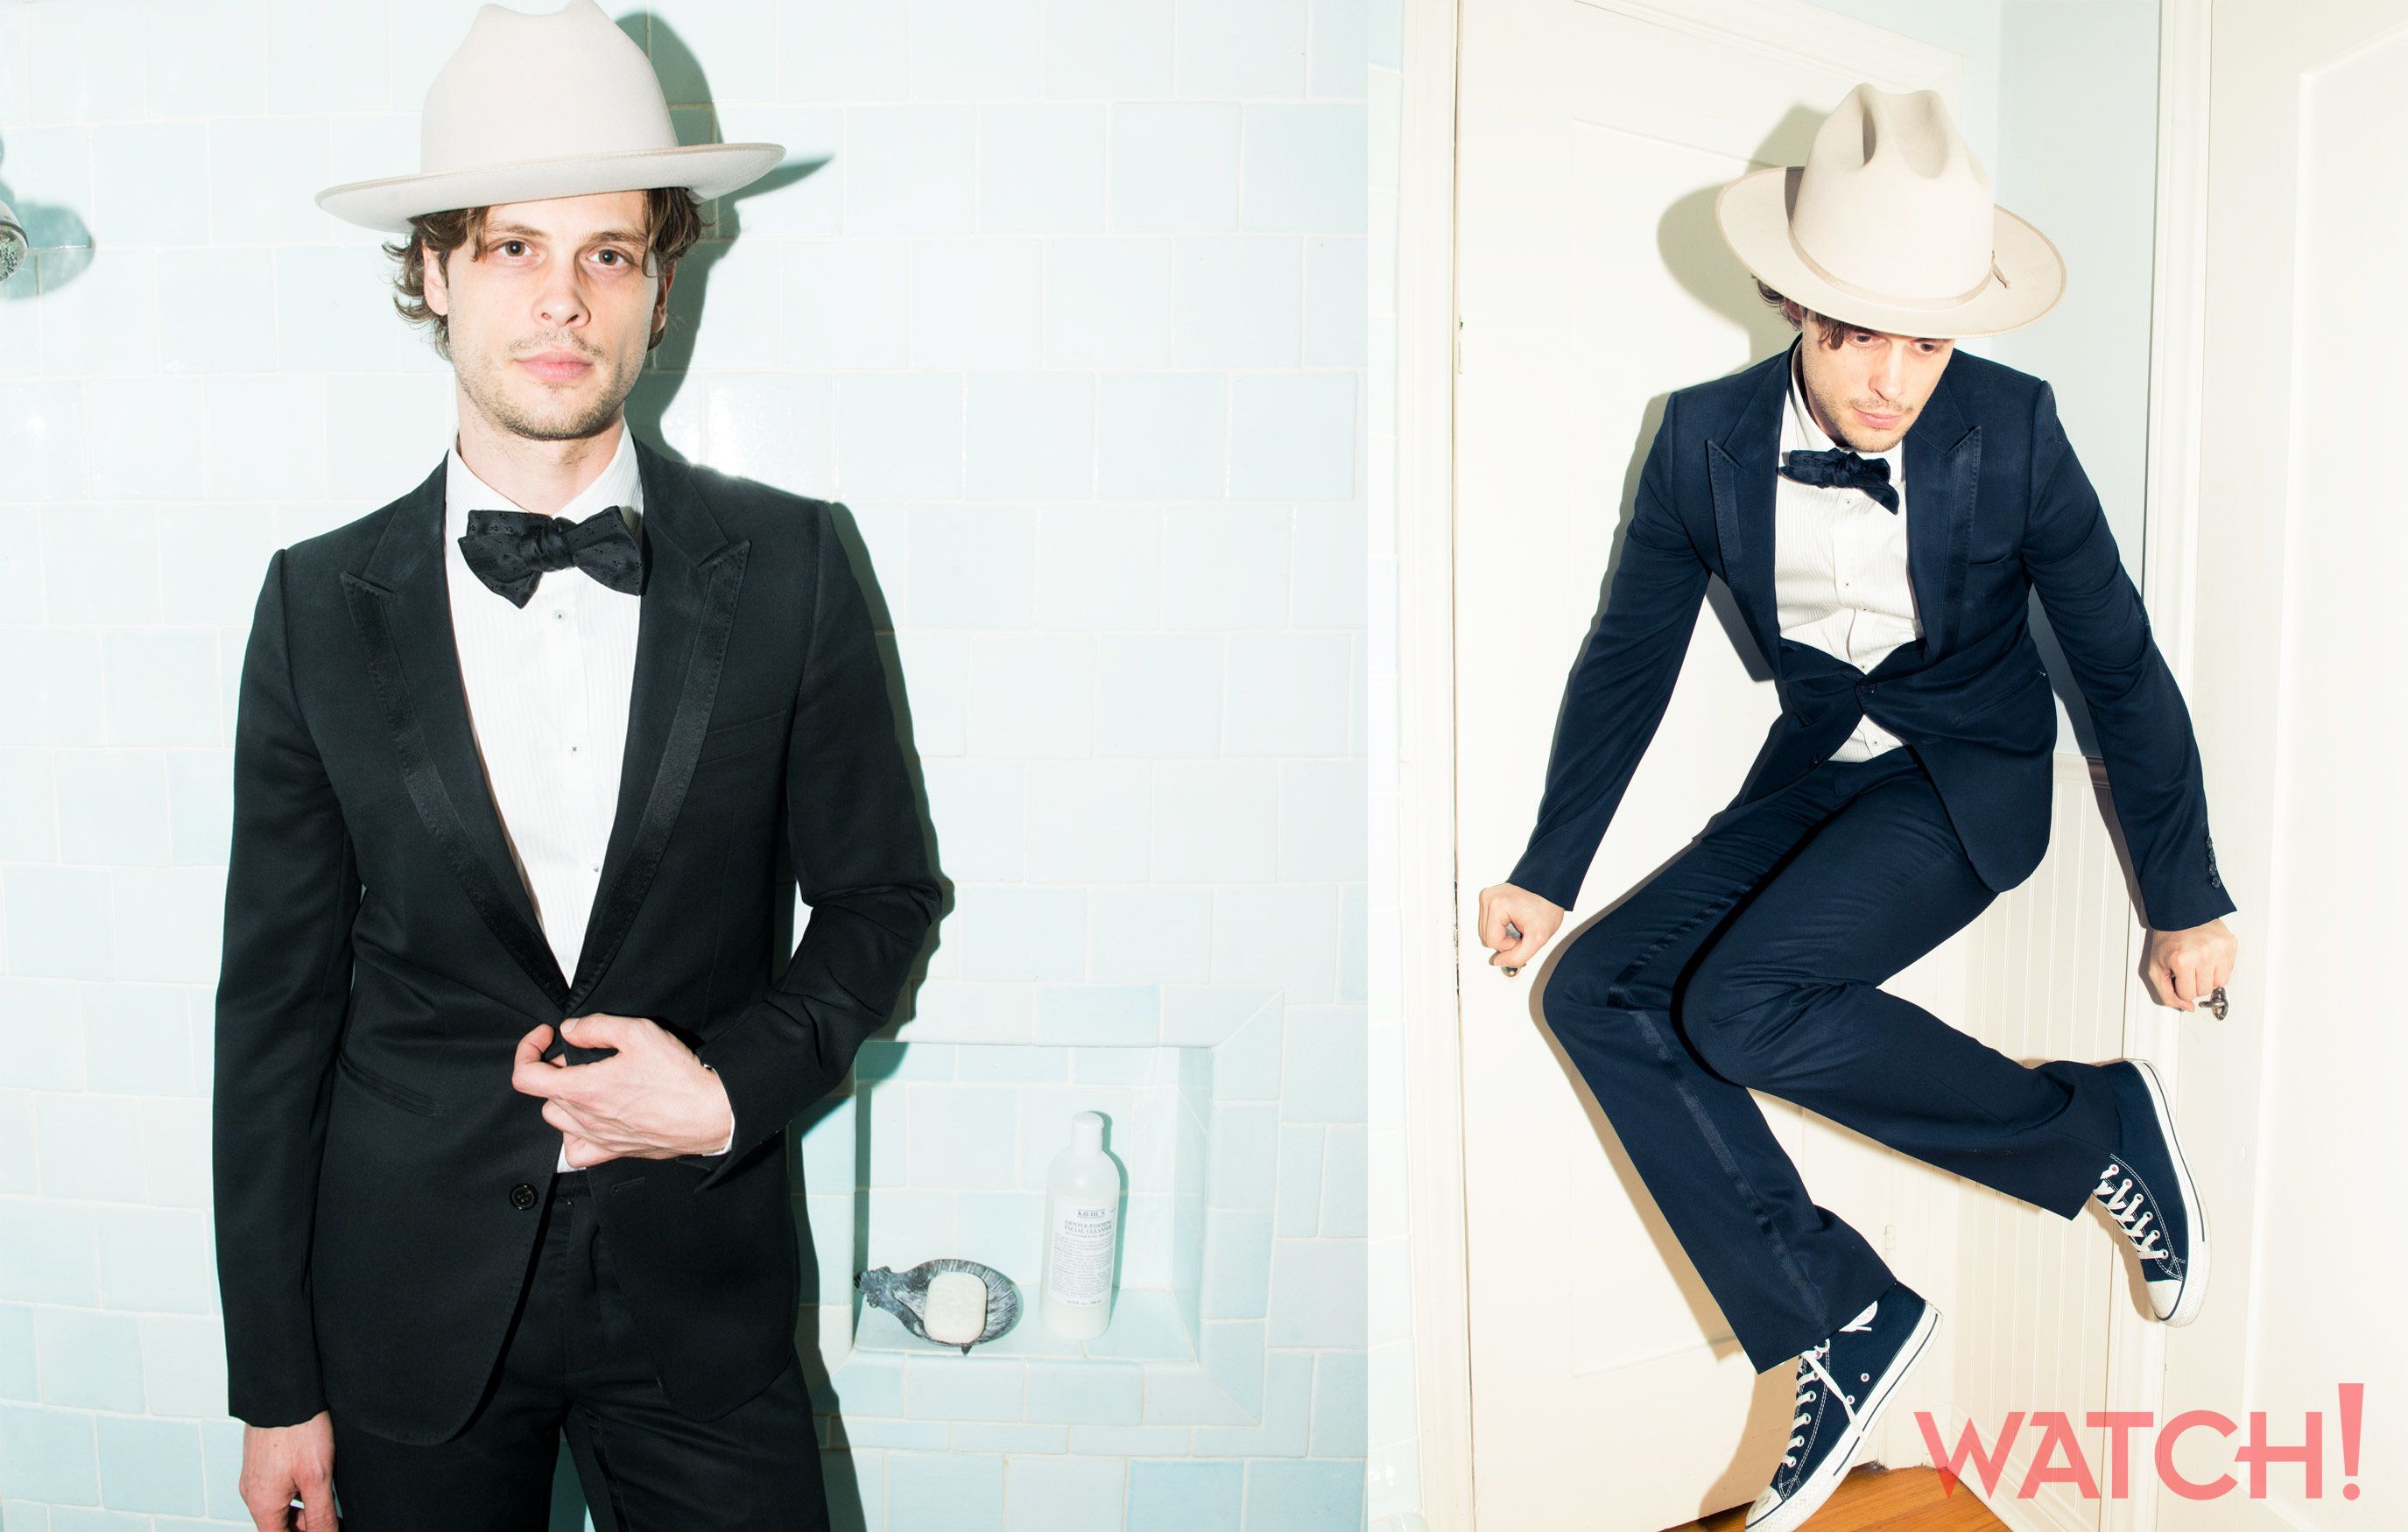 Matthew Gray Gubler in a black tux with a bowtie and Converse sneakers.